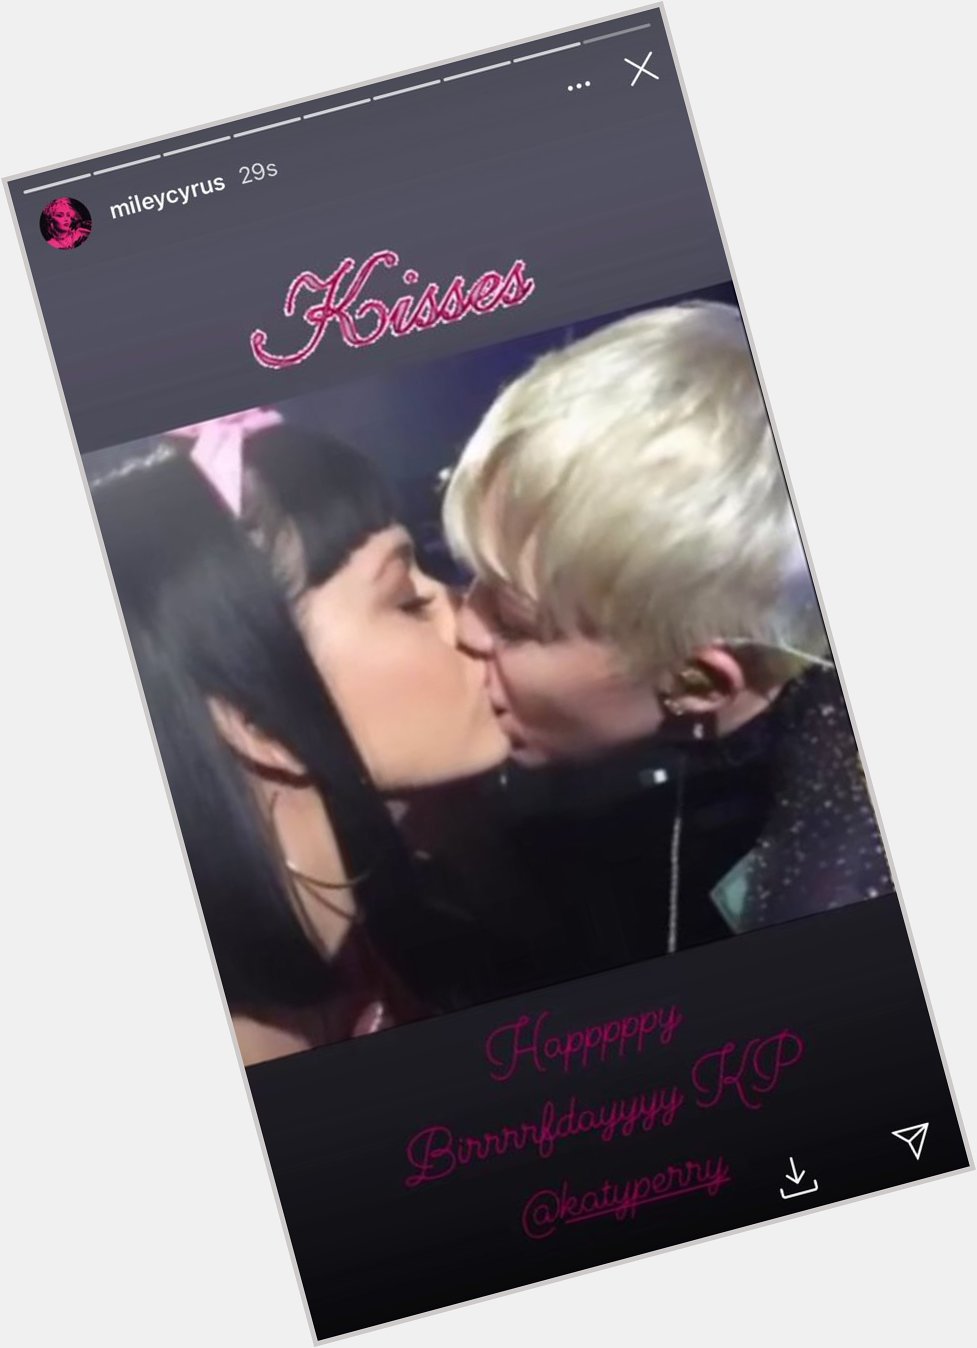 Miley Cyrus wishing Katy Perry a Happy Birthday on her Instagram story    